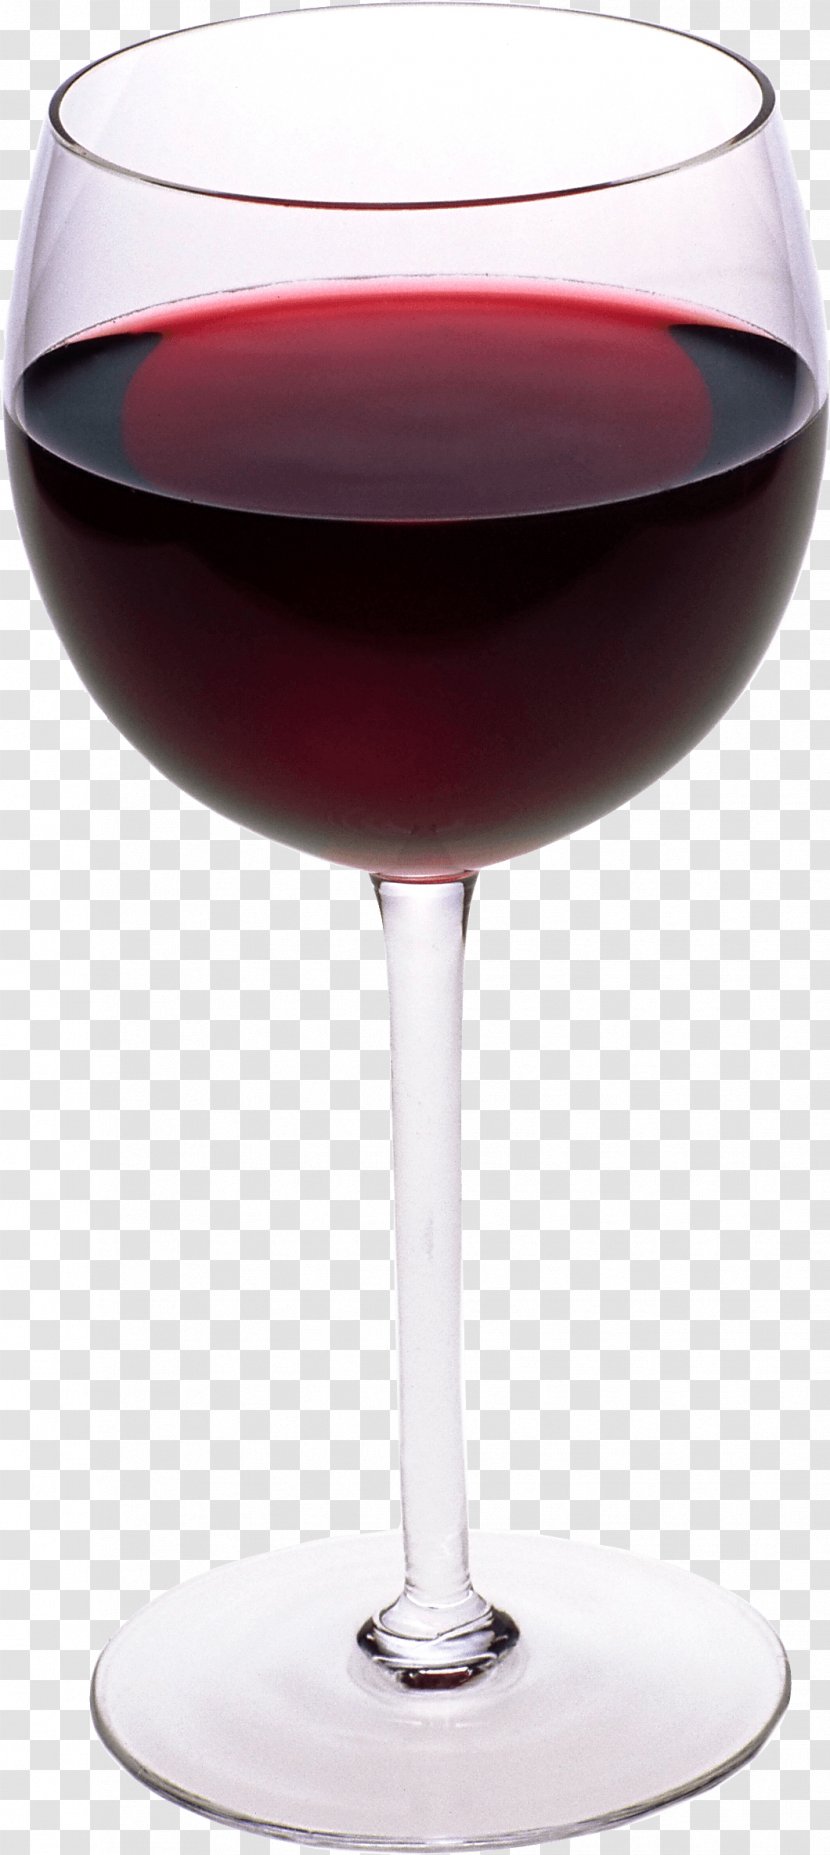 Red Wine Champagne Glass - Image Transparent PNG